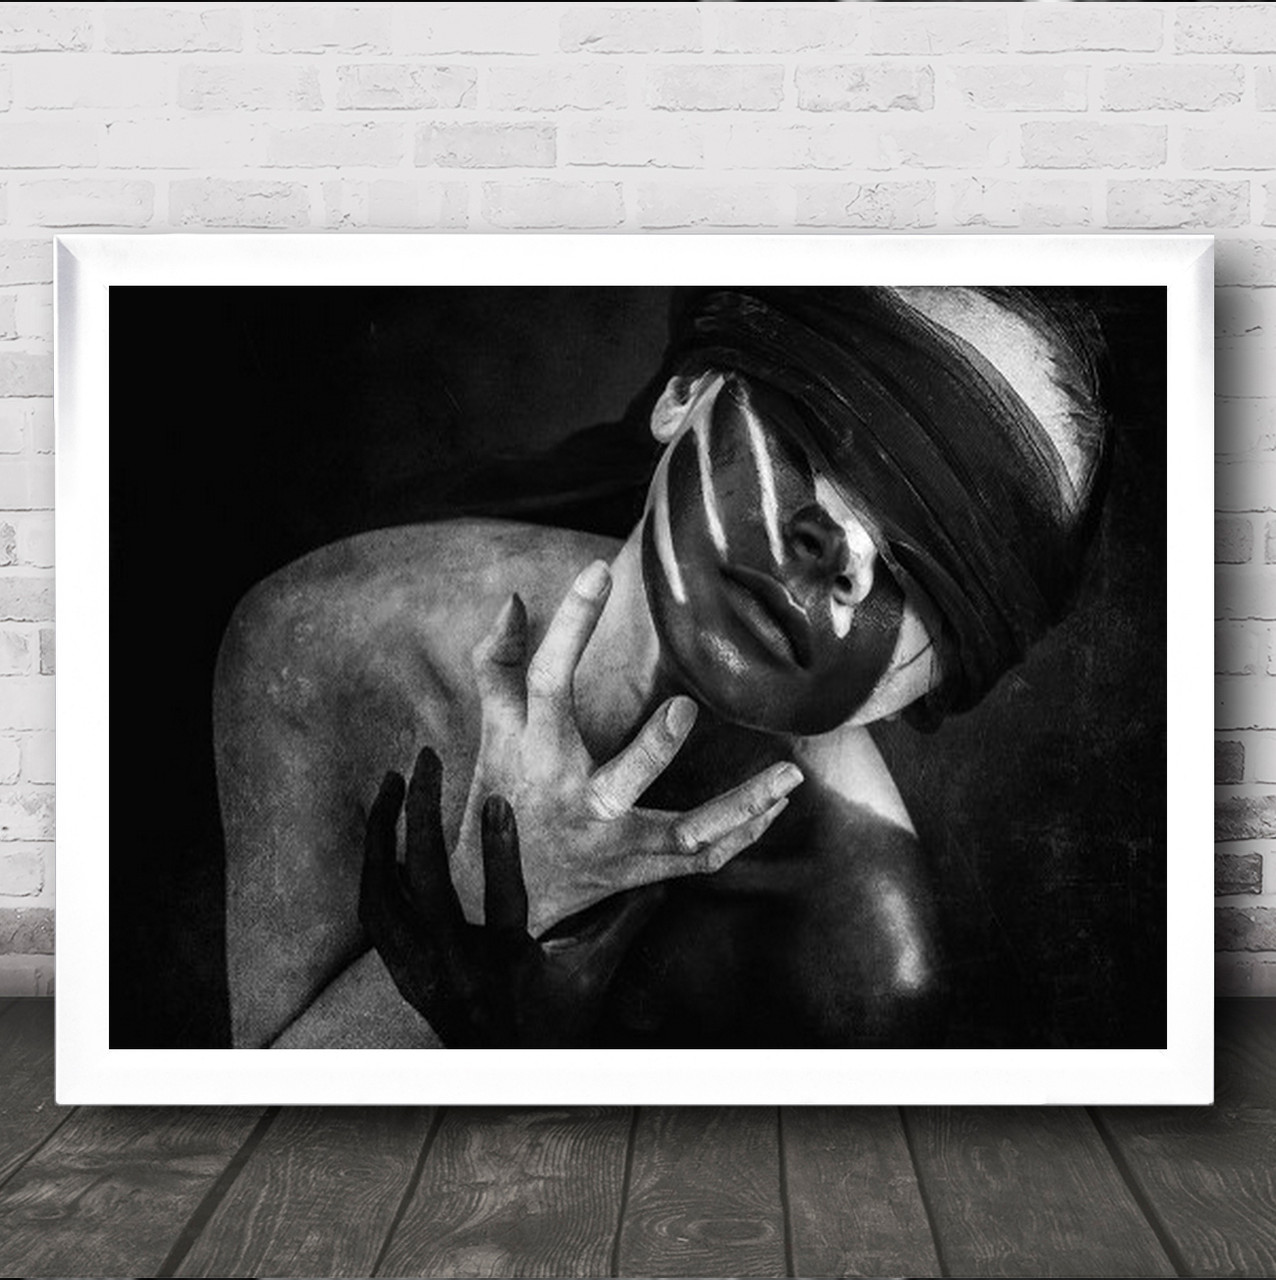 Blindfolded Man available as Framed Prints, Photos, Wall Art and